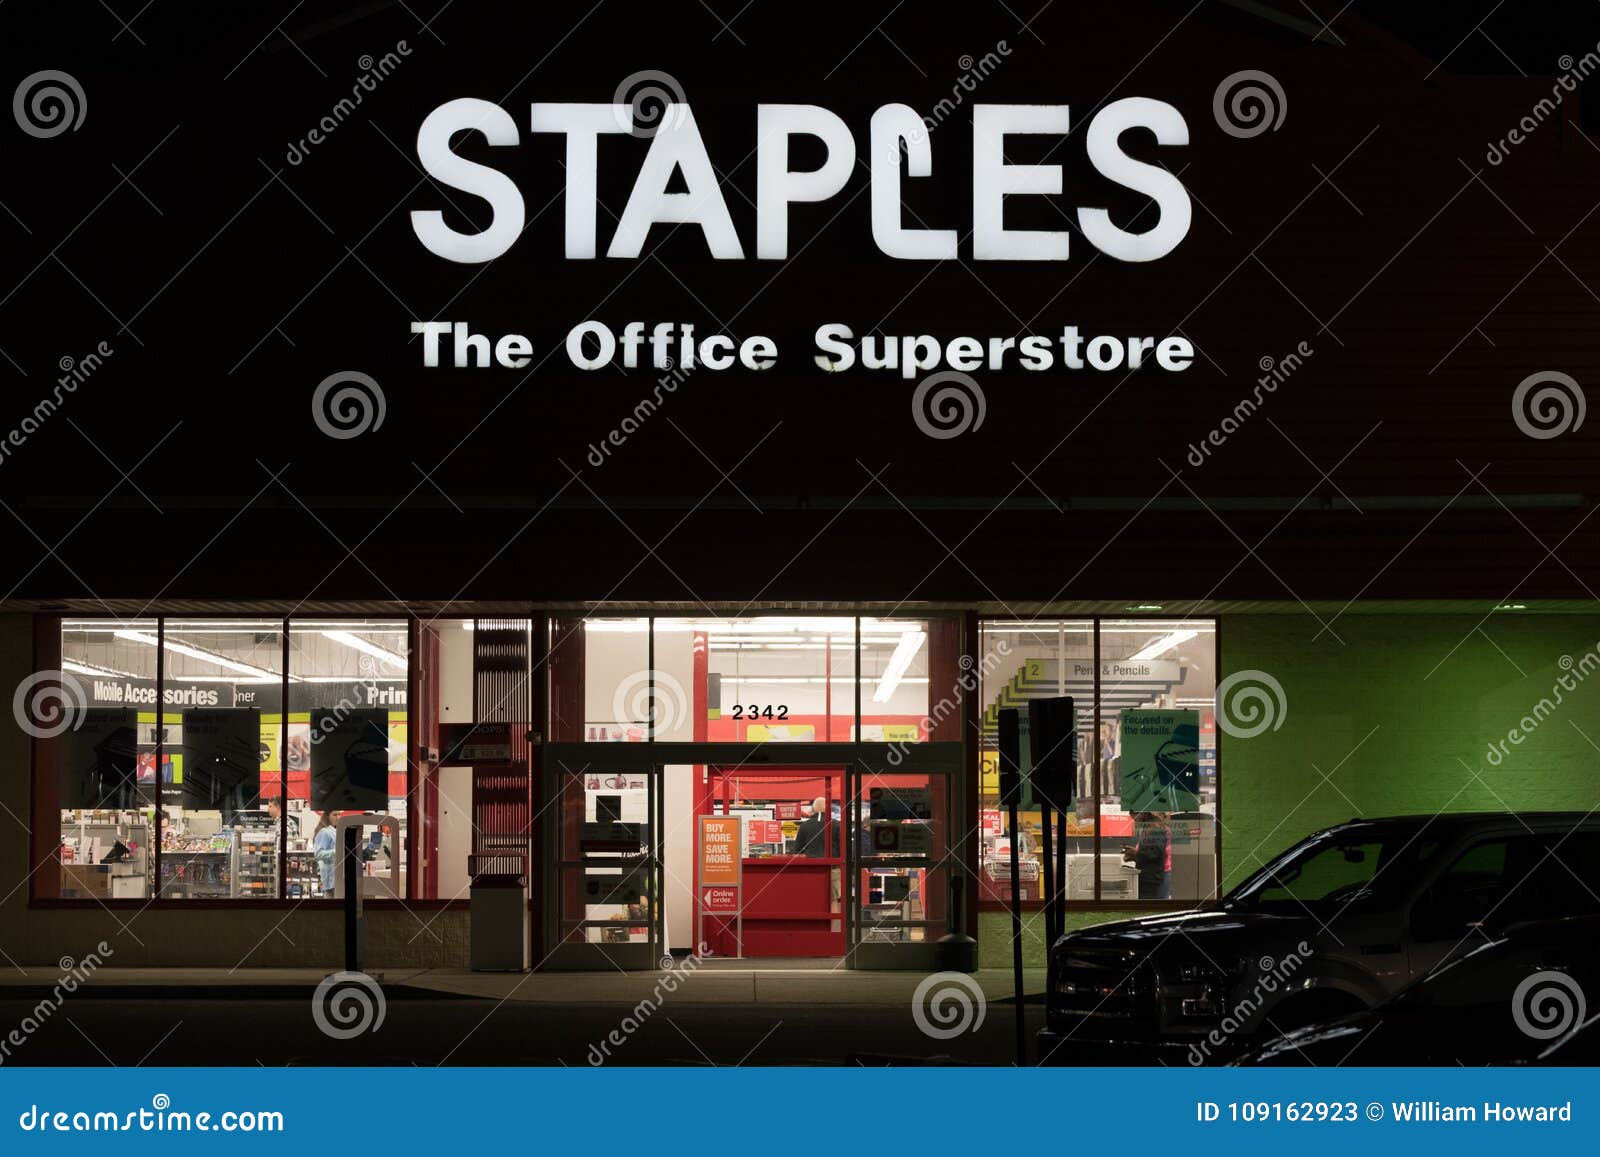 Staples Office Supply Store Entrance Night Wilson Nc January Staples Location Entrance Night Staples Office Supply 109162923 